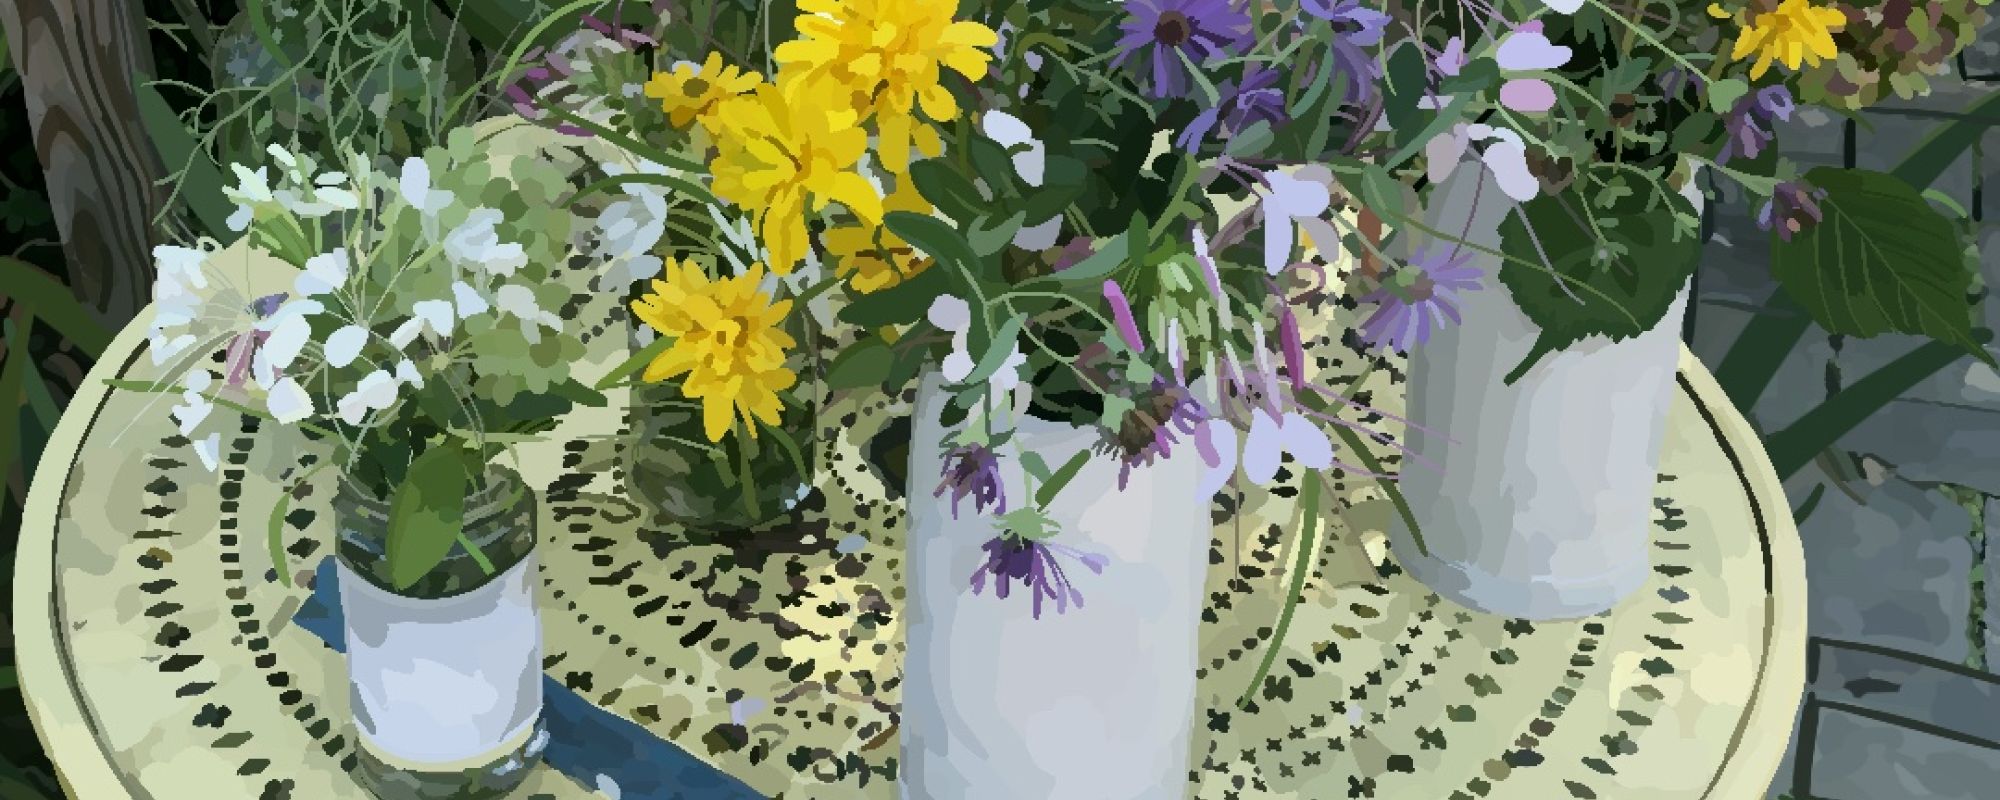 vases of flowers on a table with a sign that says free flowers